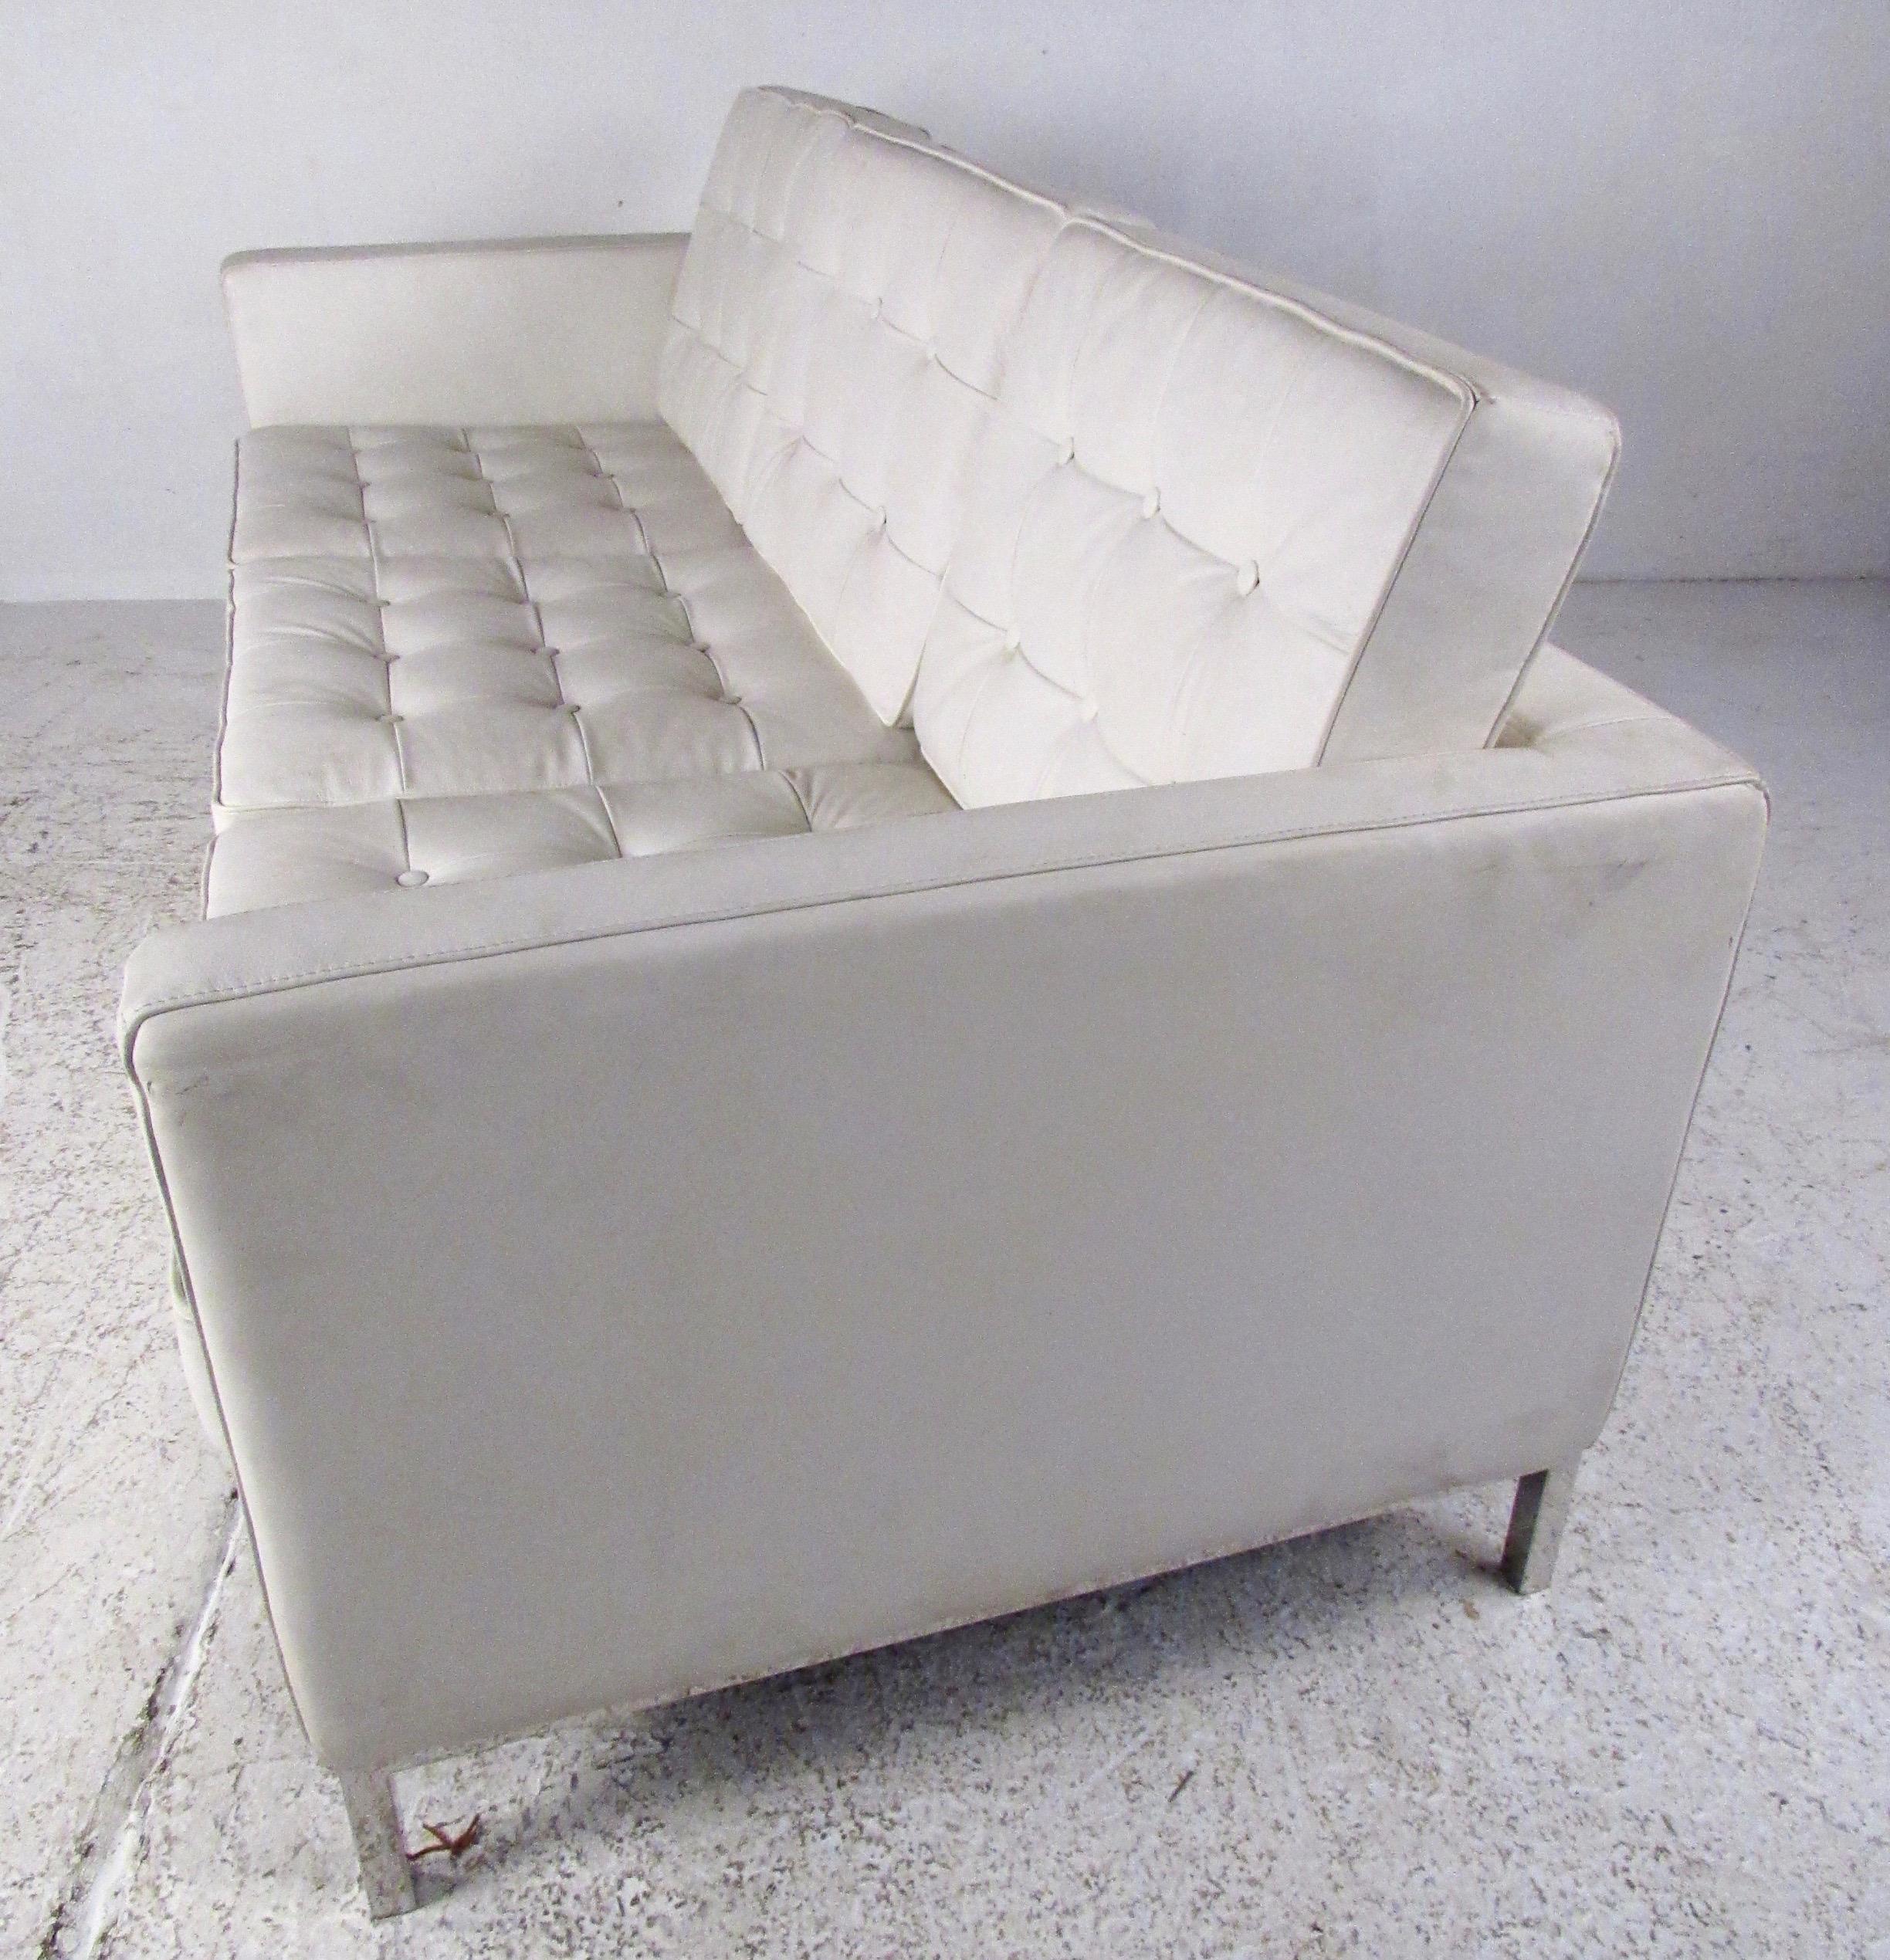 This three-seat modern sofa features chrome finish frame with tufted vinyl upholstery. Distinctive sofa in the style of Florence Knoll is the perfect size for apartment living or office seating. Please confirm item location (NY or NJ).